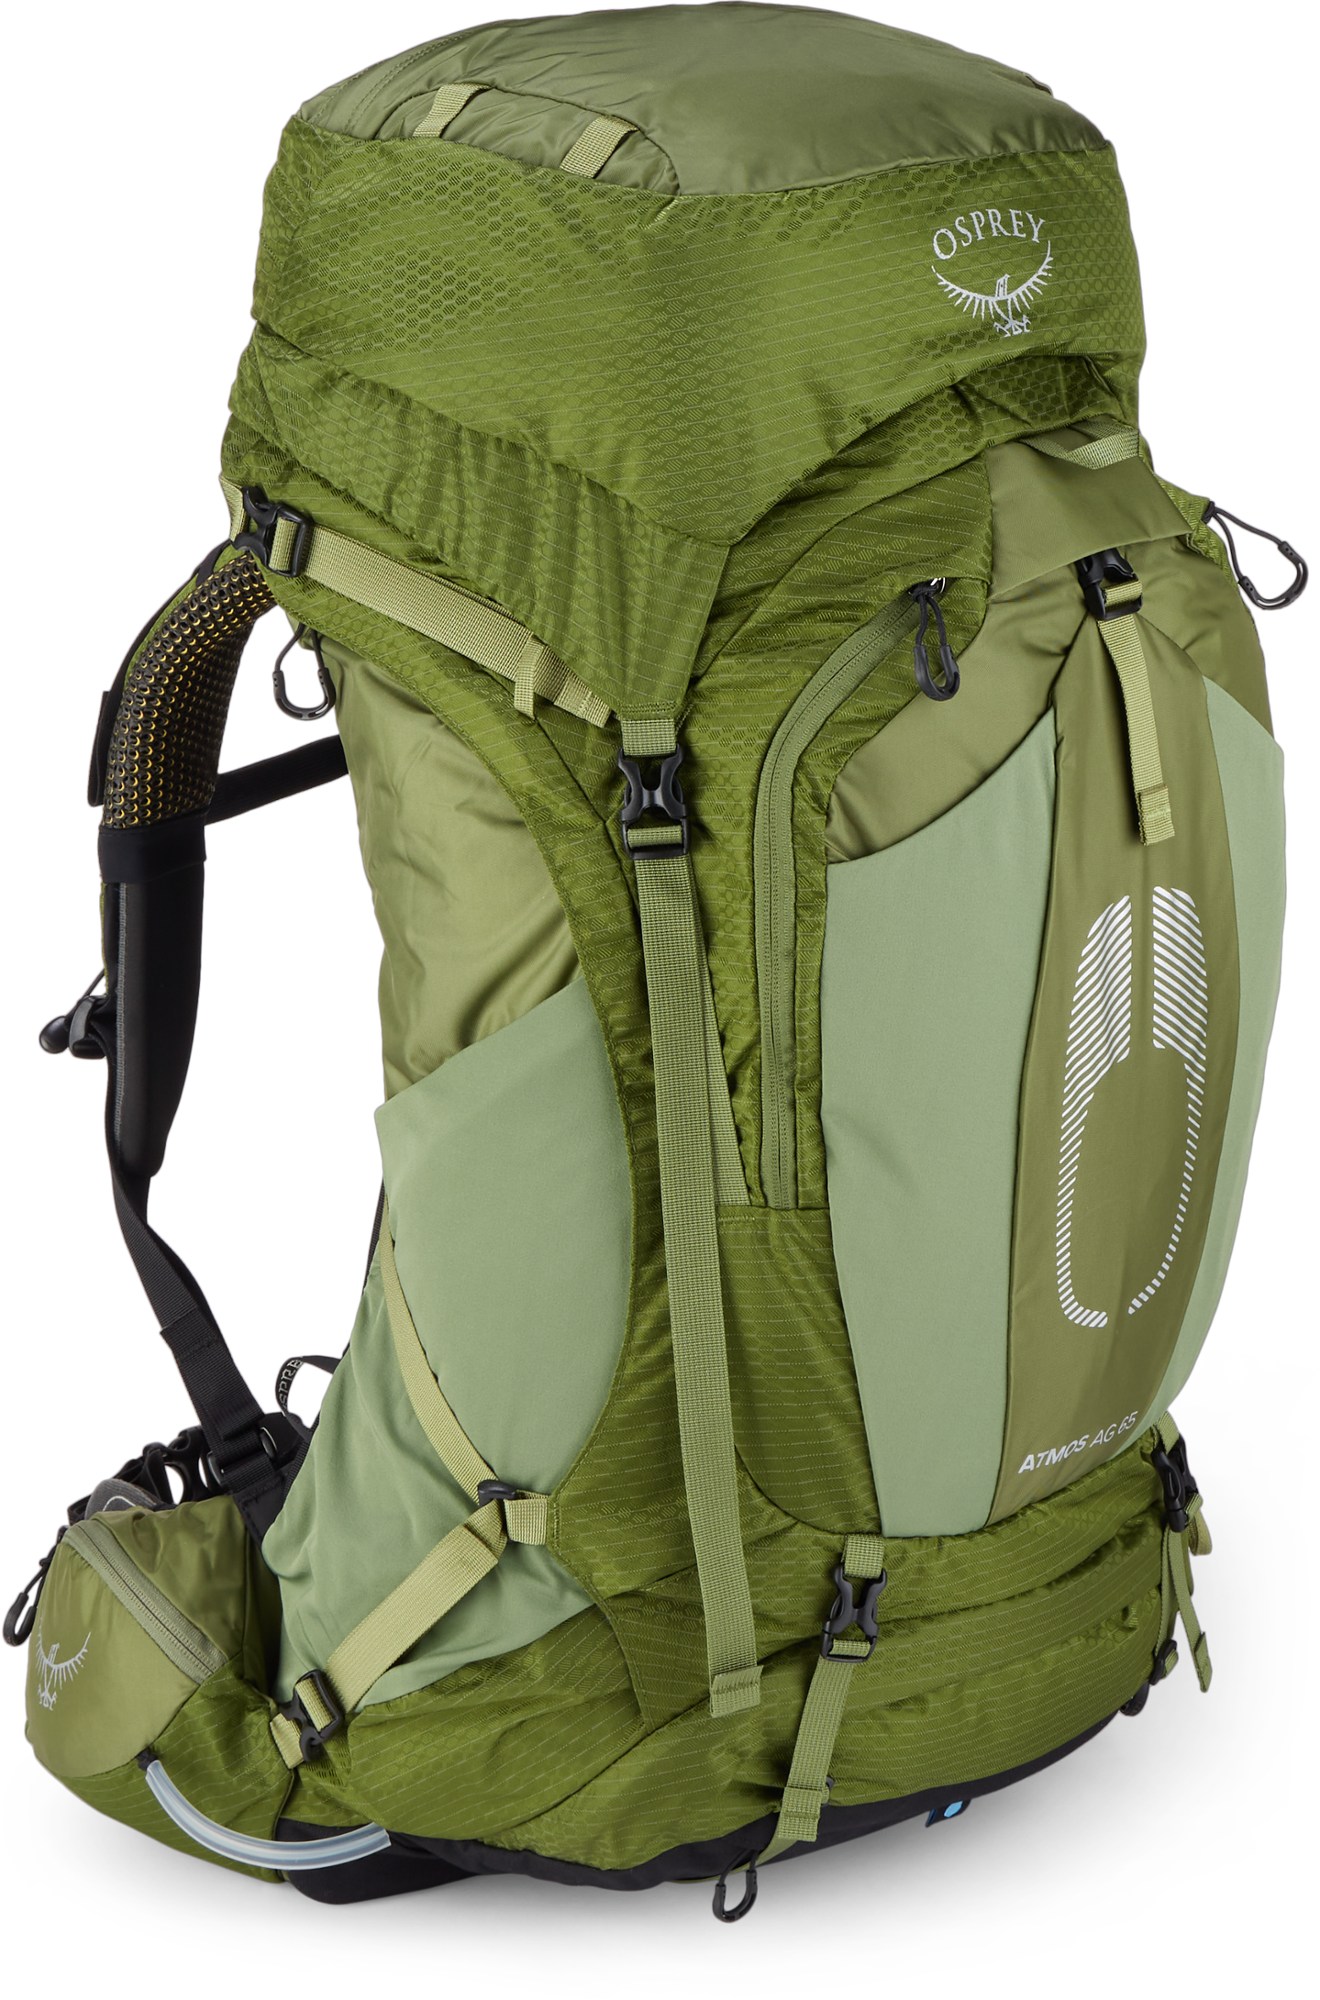 REI Anniversary Sale (Osprey Atmos AG 65 backpacking pack)